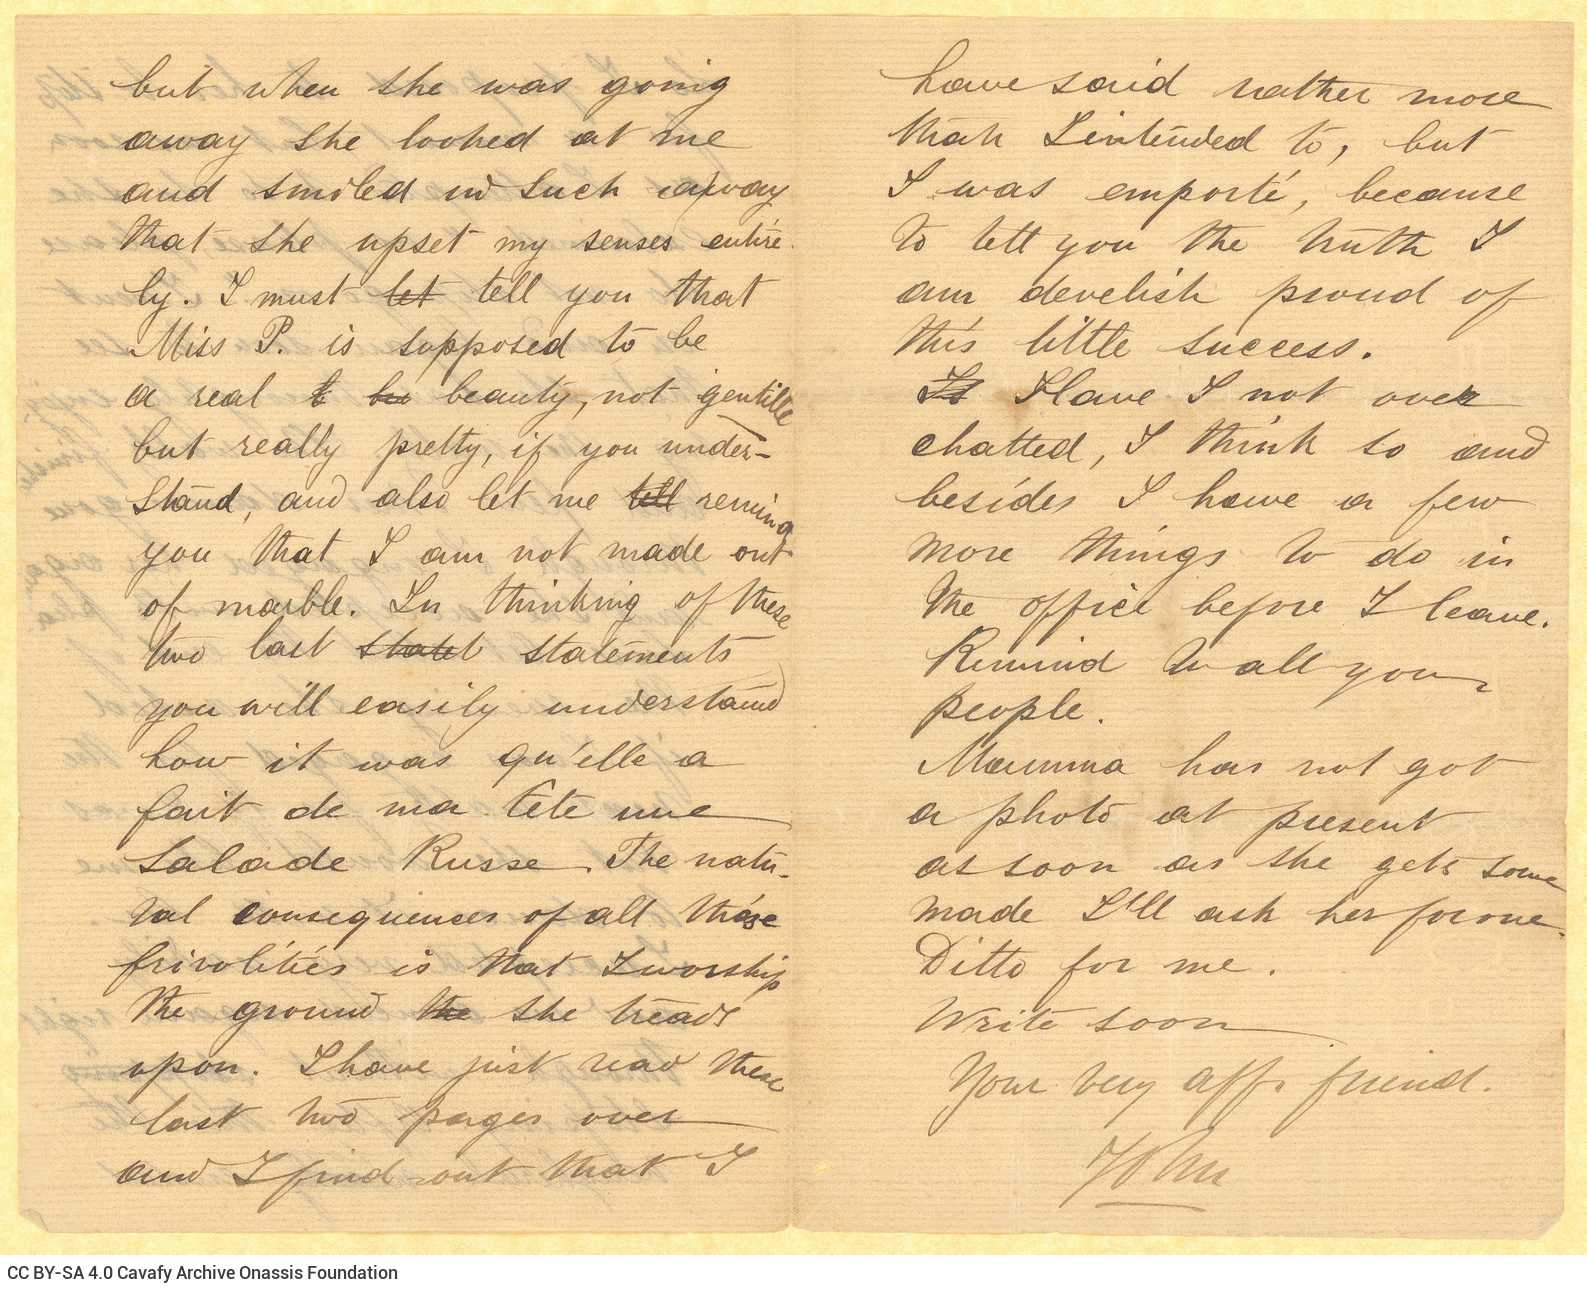 Handwritten letter by John [Rodocanachi] to Cavafy in two bifolios, with notes on all sides except for the verso of the last 